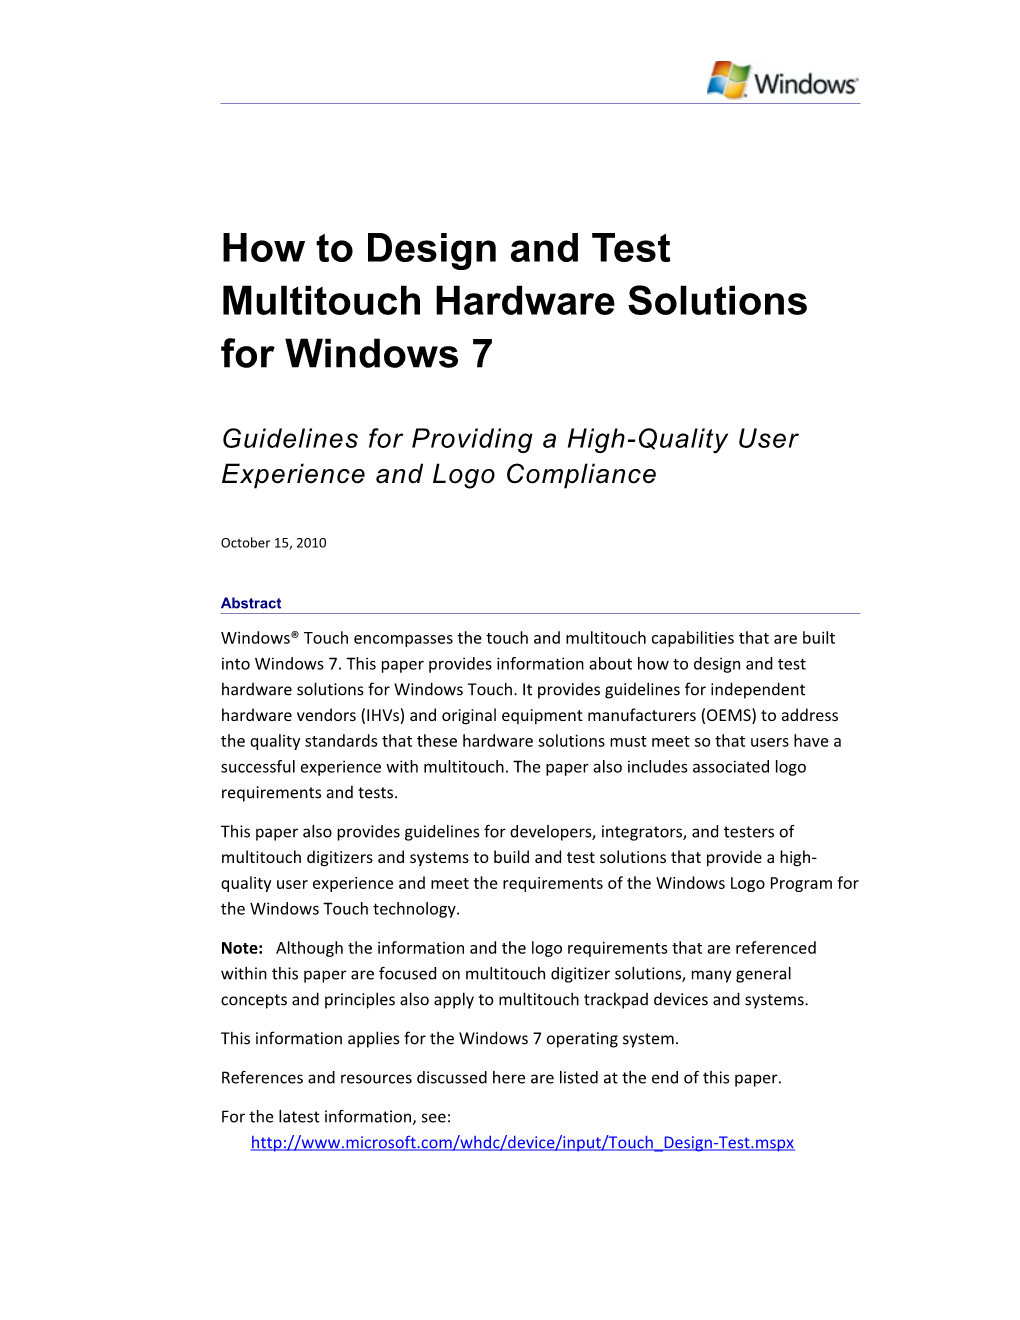 How to Design and Test Multitouch Hardware Solutions for Windows 7 - 1